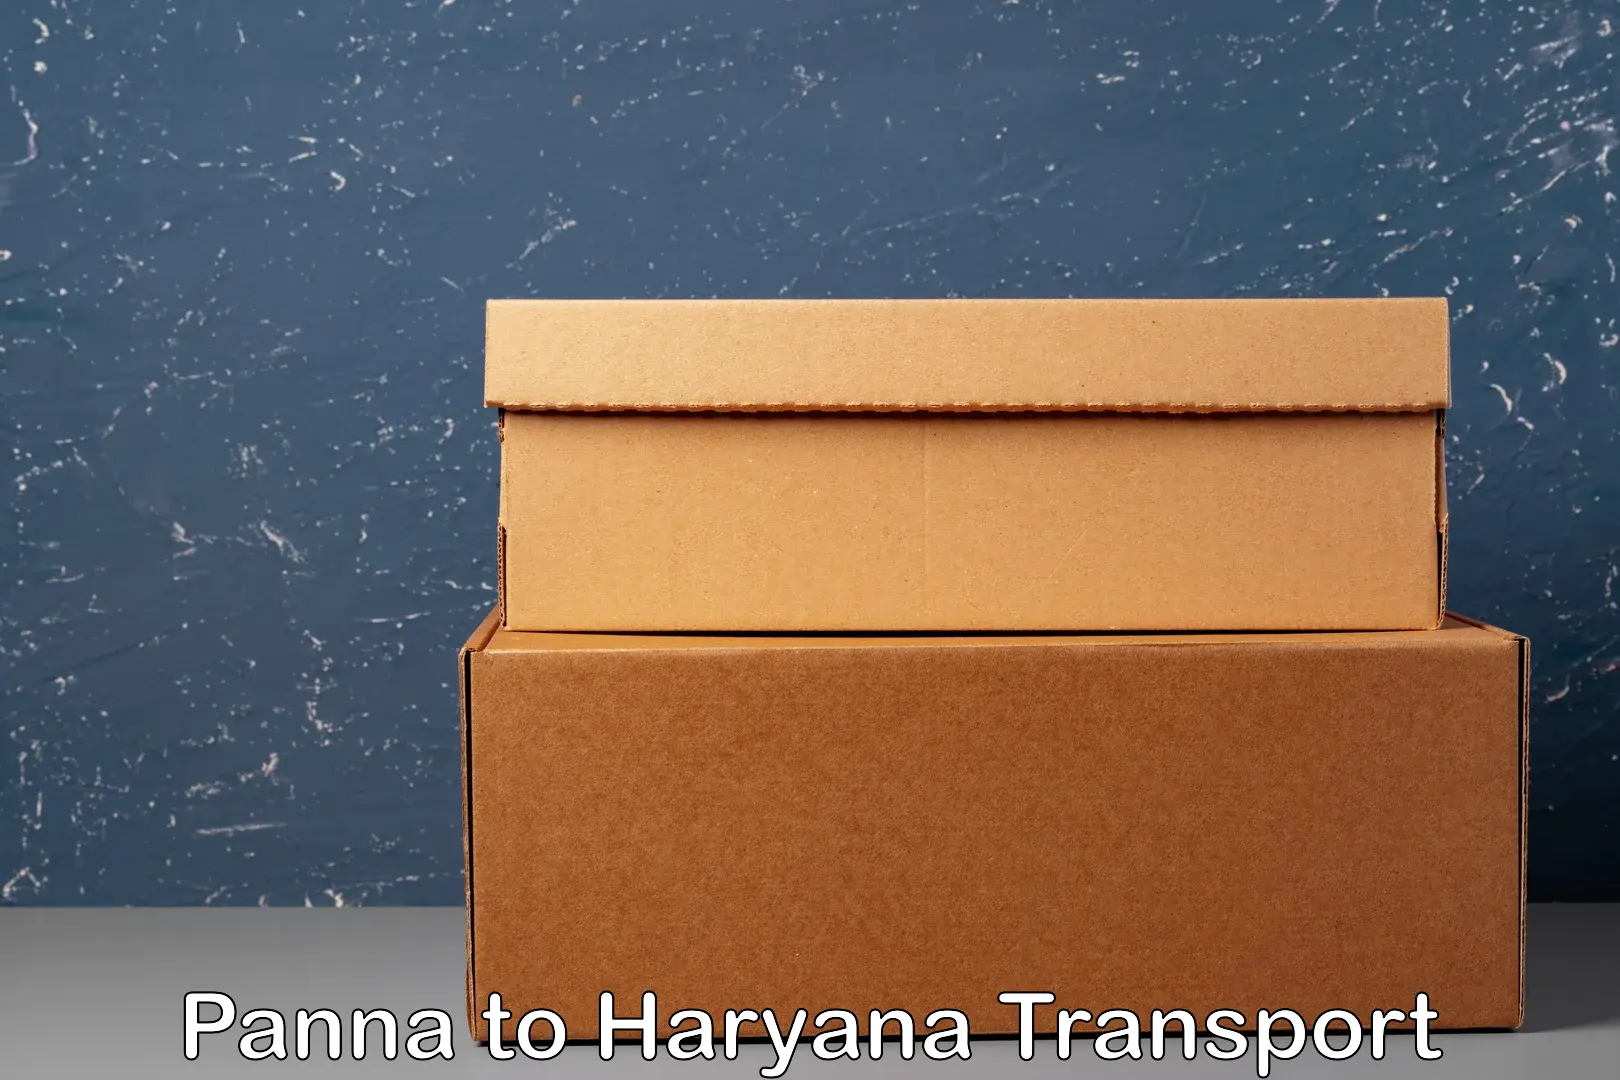 Nationwide transport services Panna to Haryana